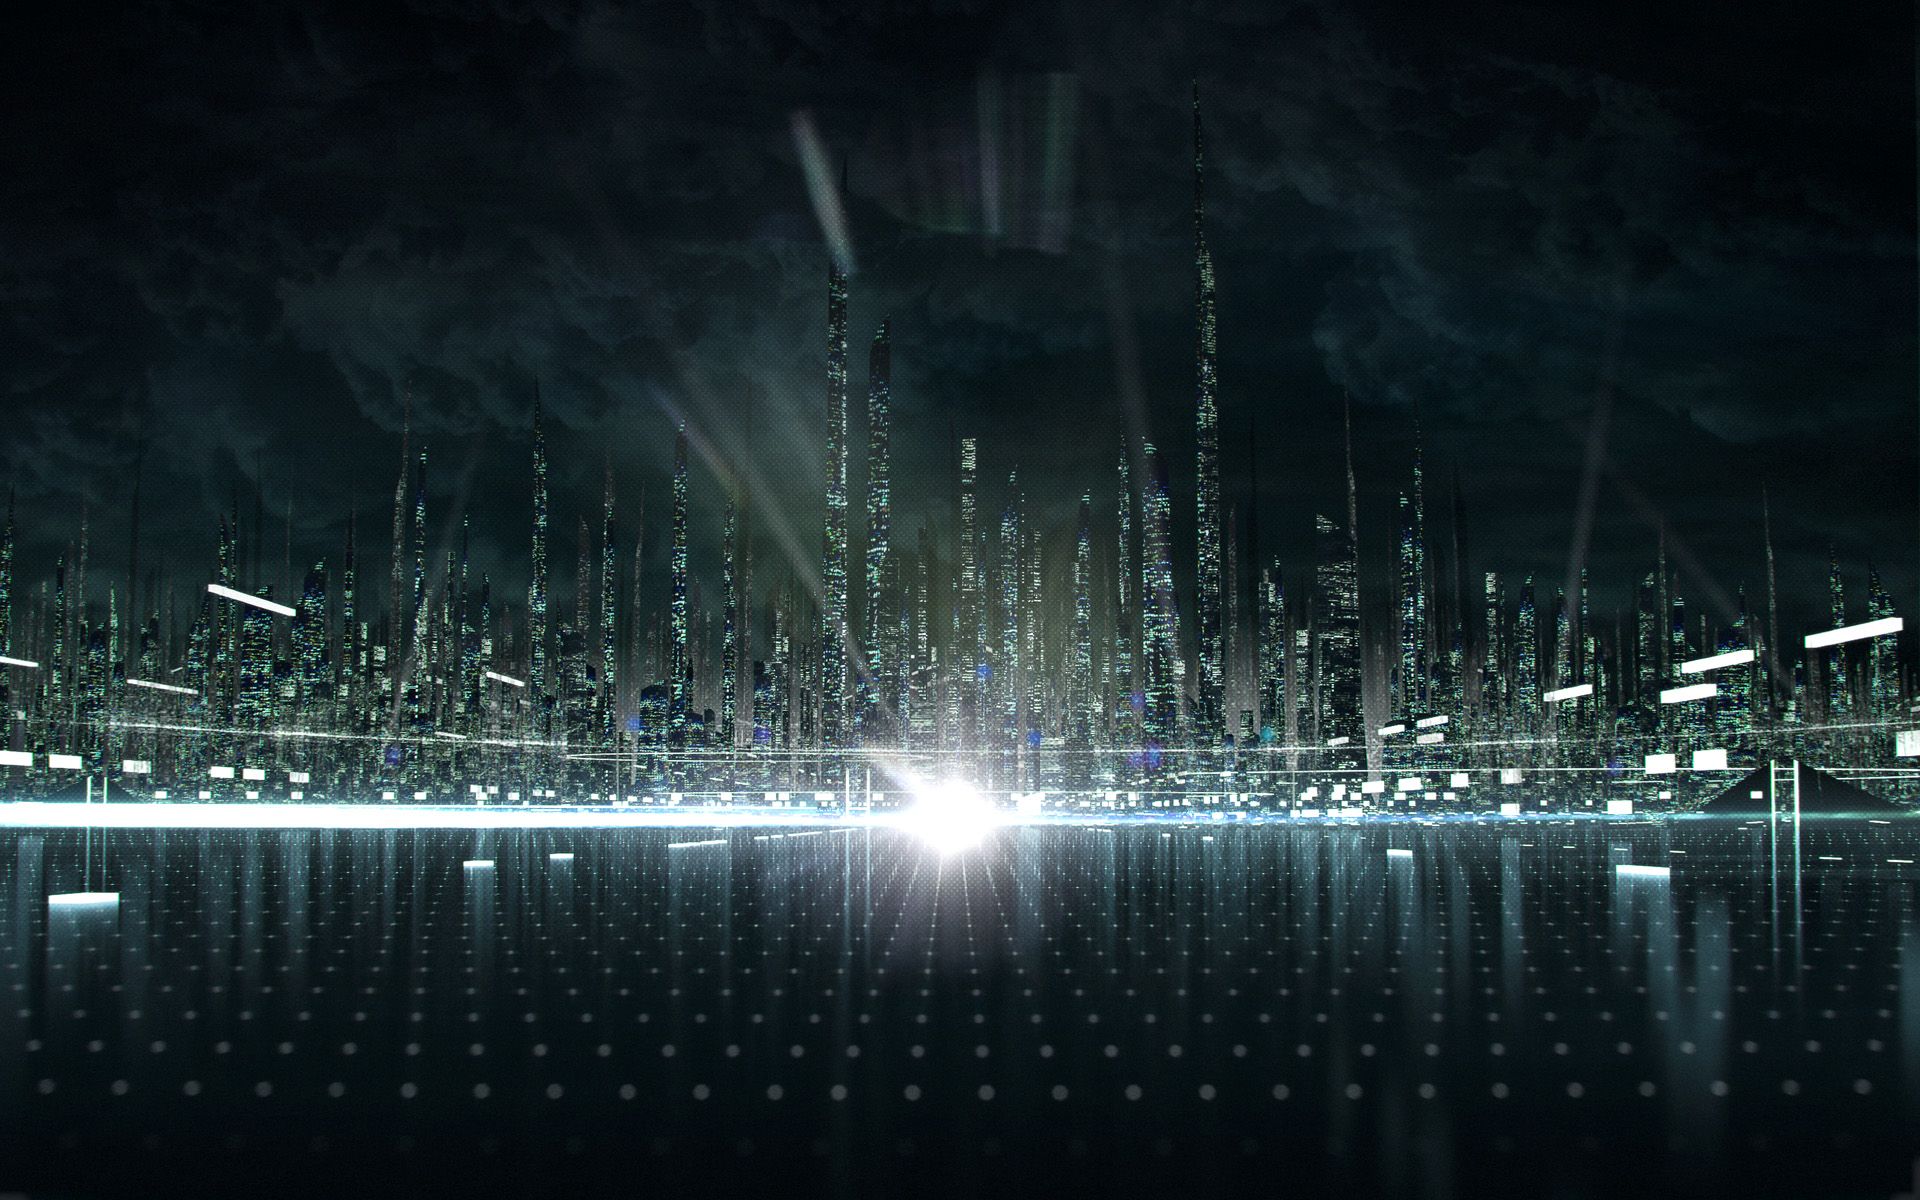 Tron Legacy Backgrounds